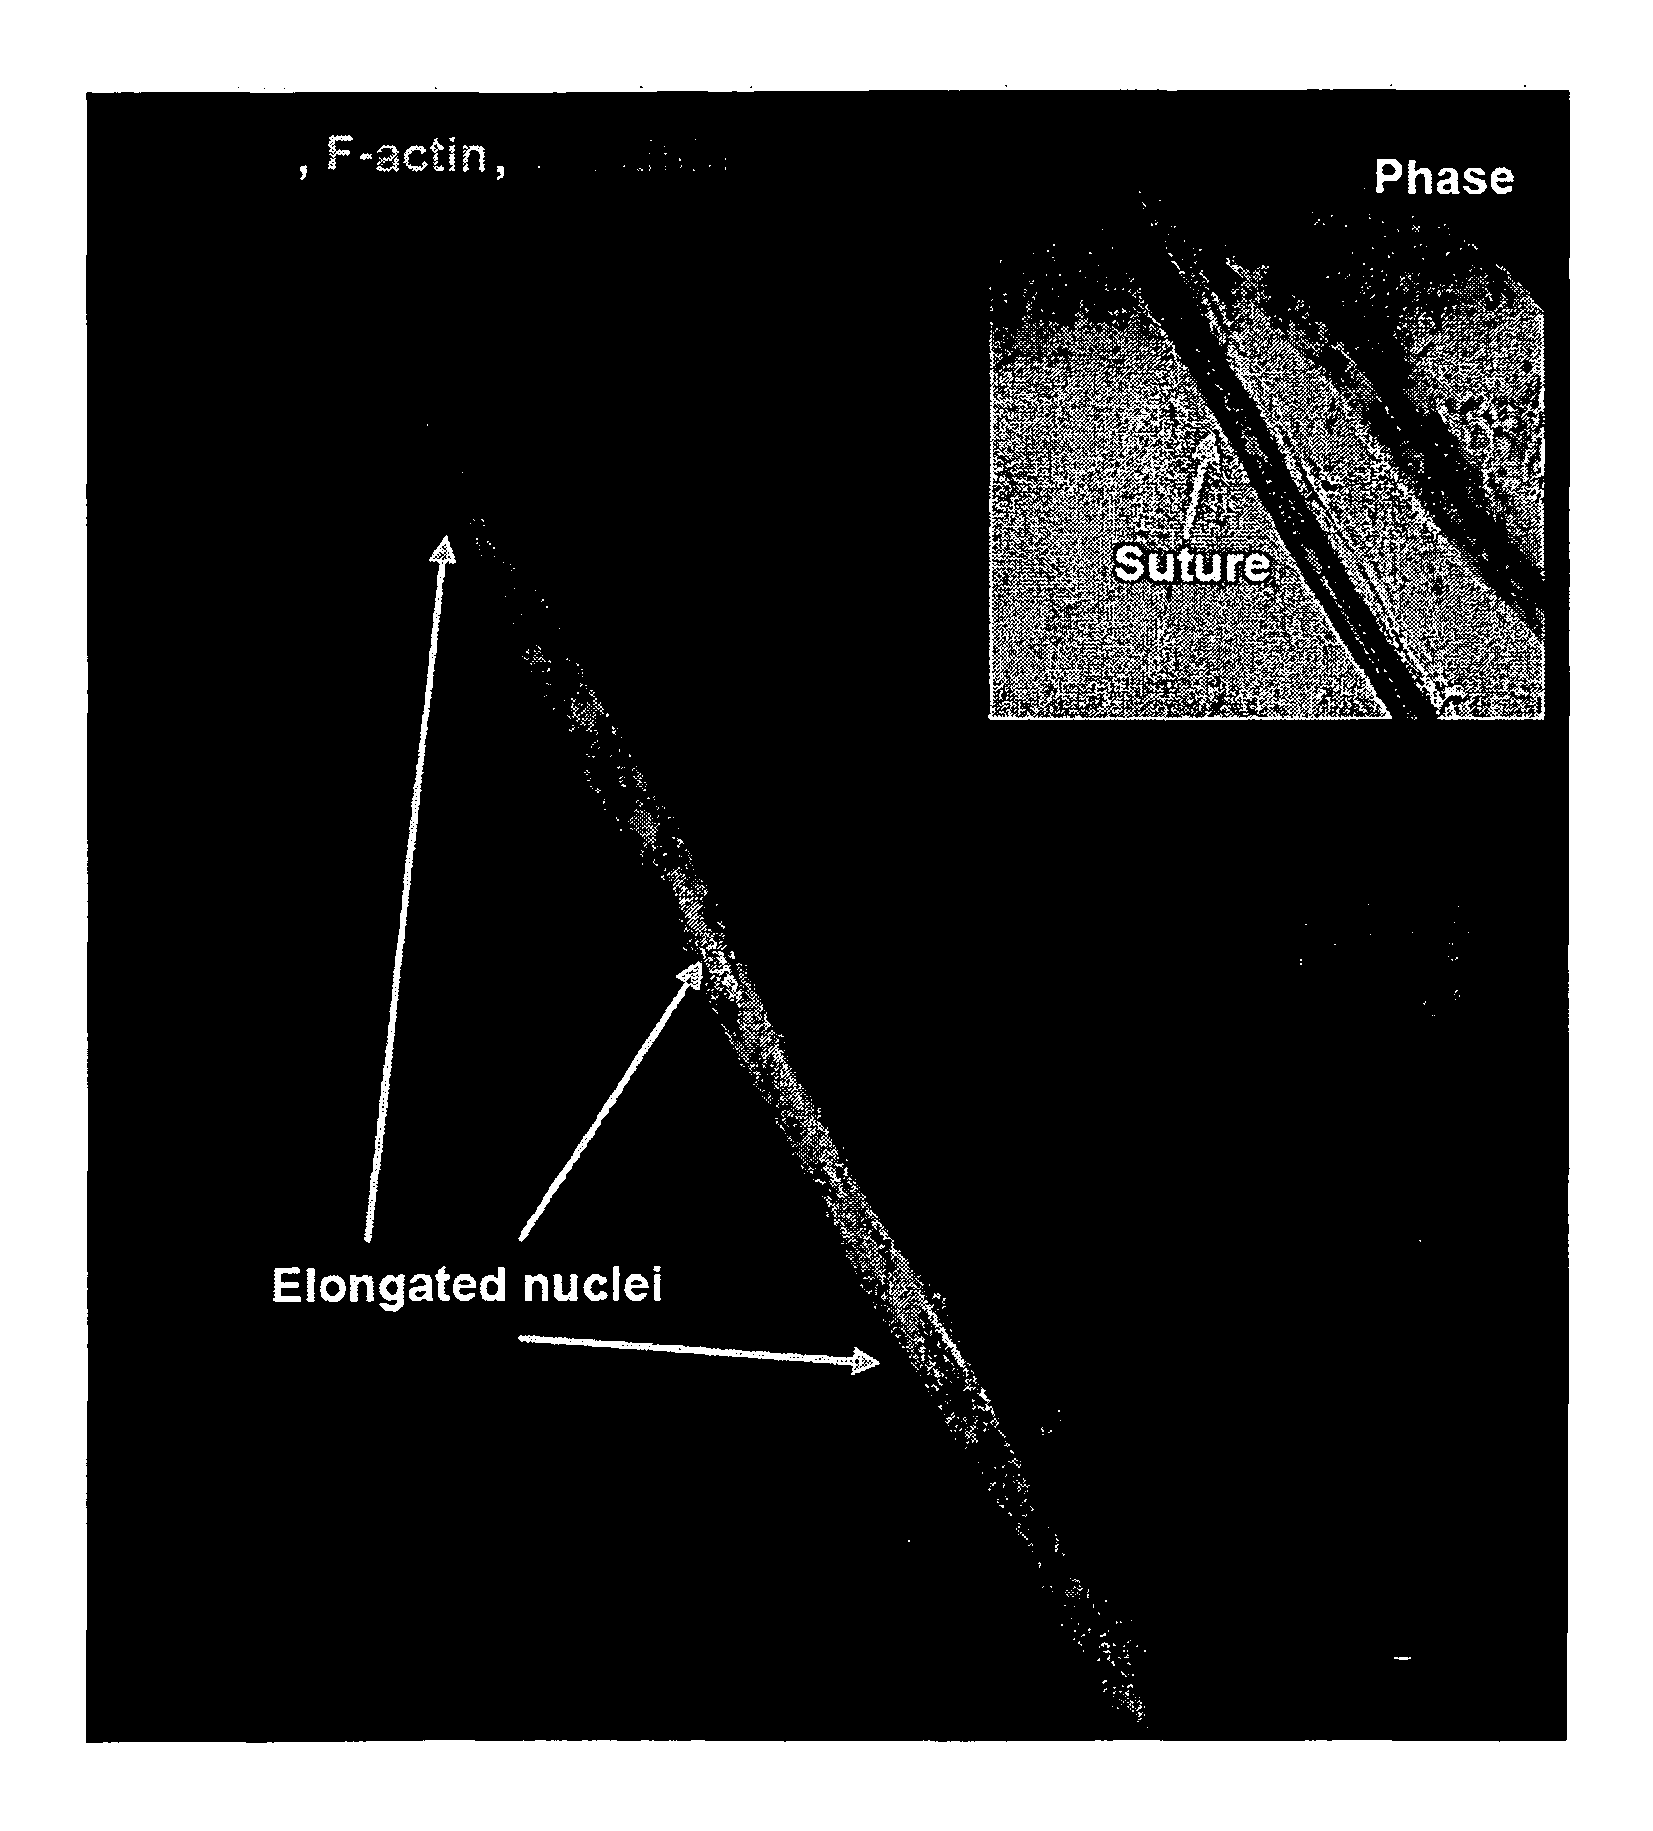 Boundary conditions for the arrangement of cells and tissues